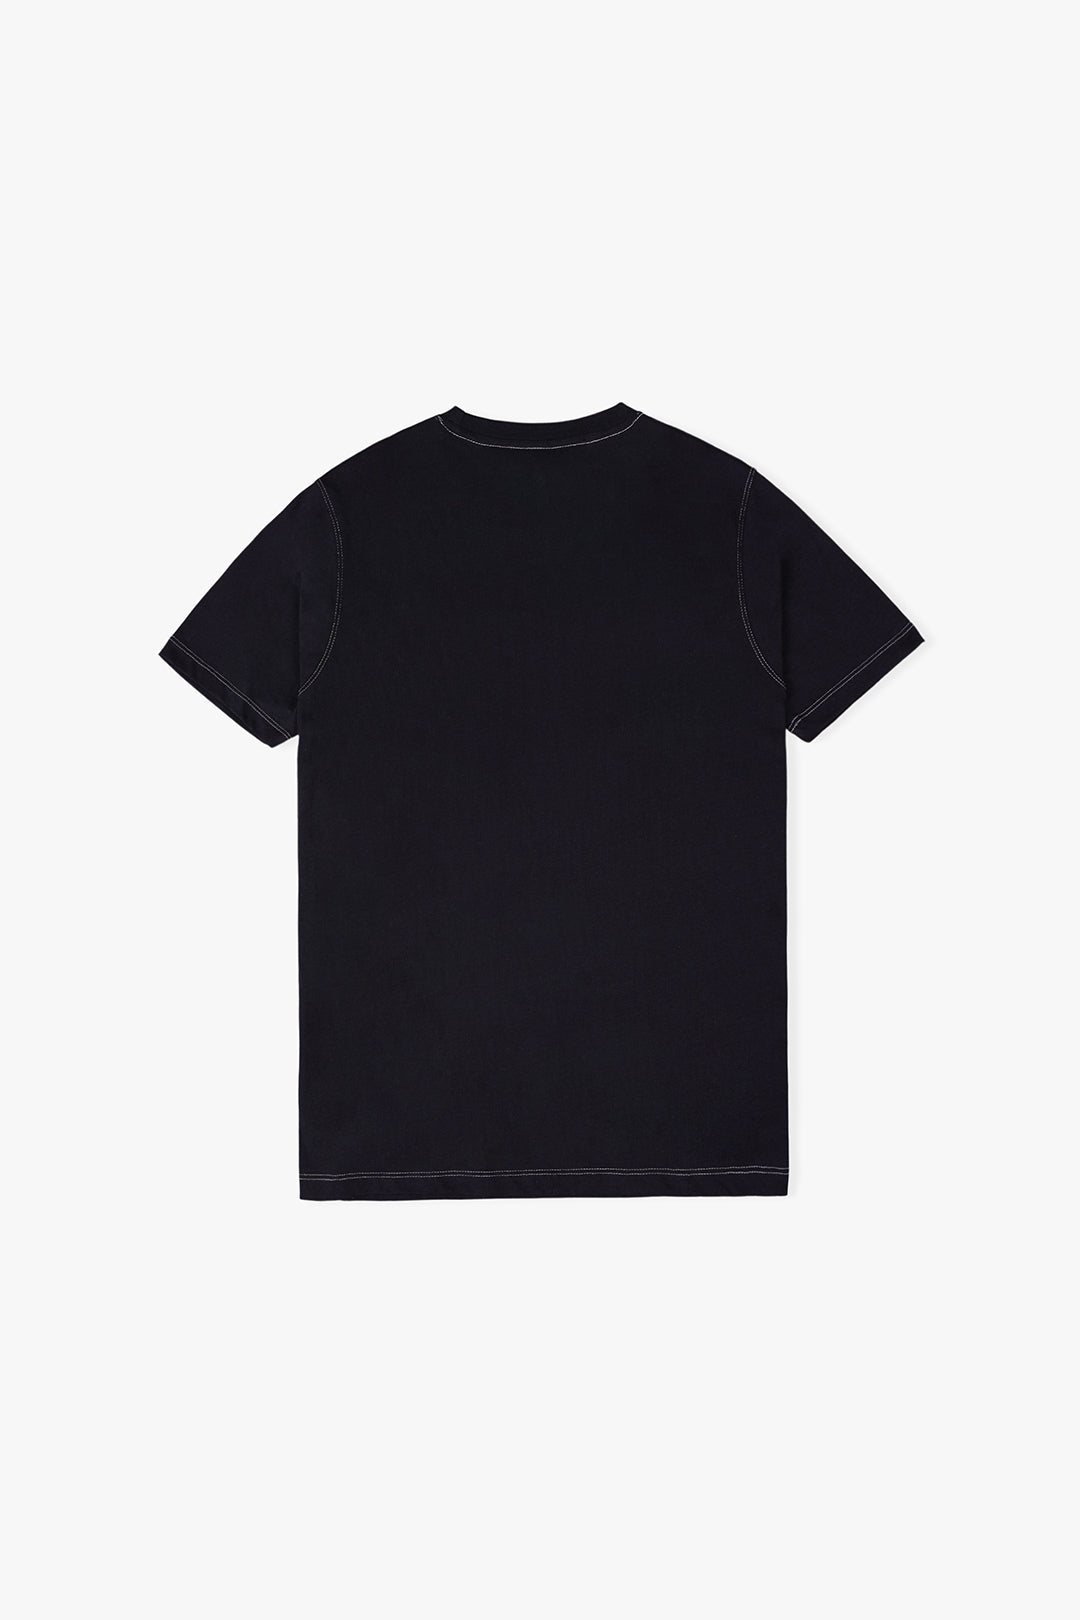 Men's Black T-Shirt With Contrast Thread